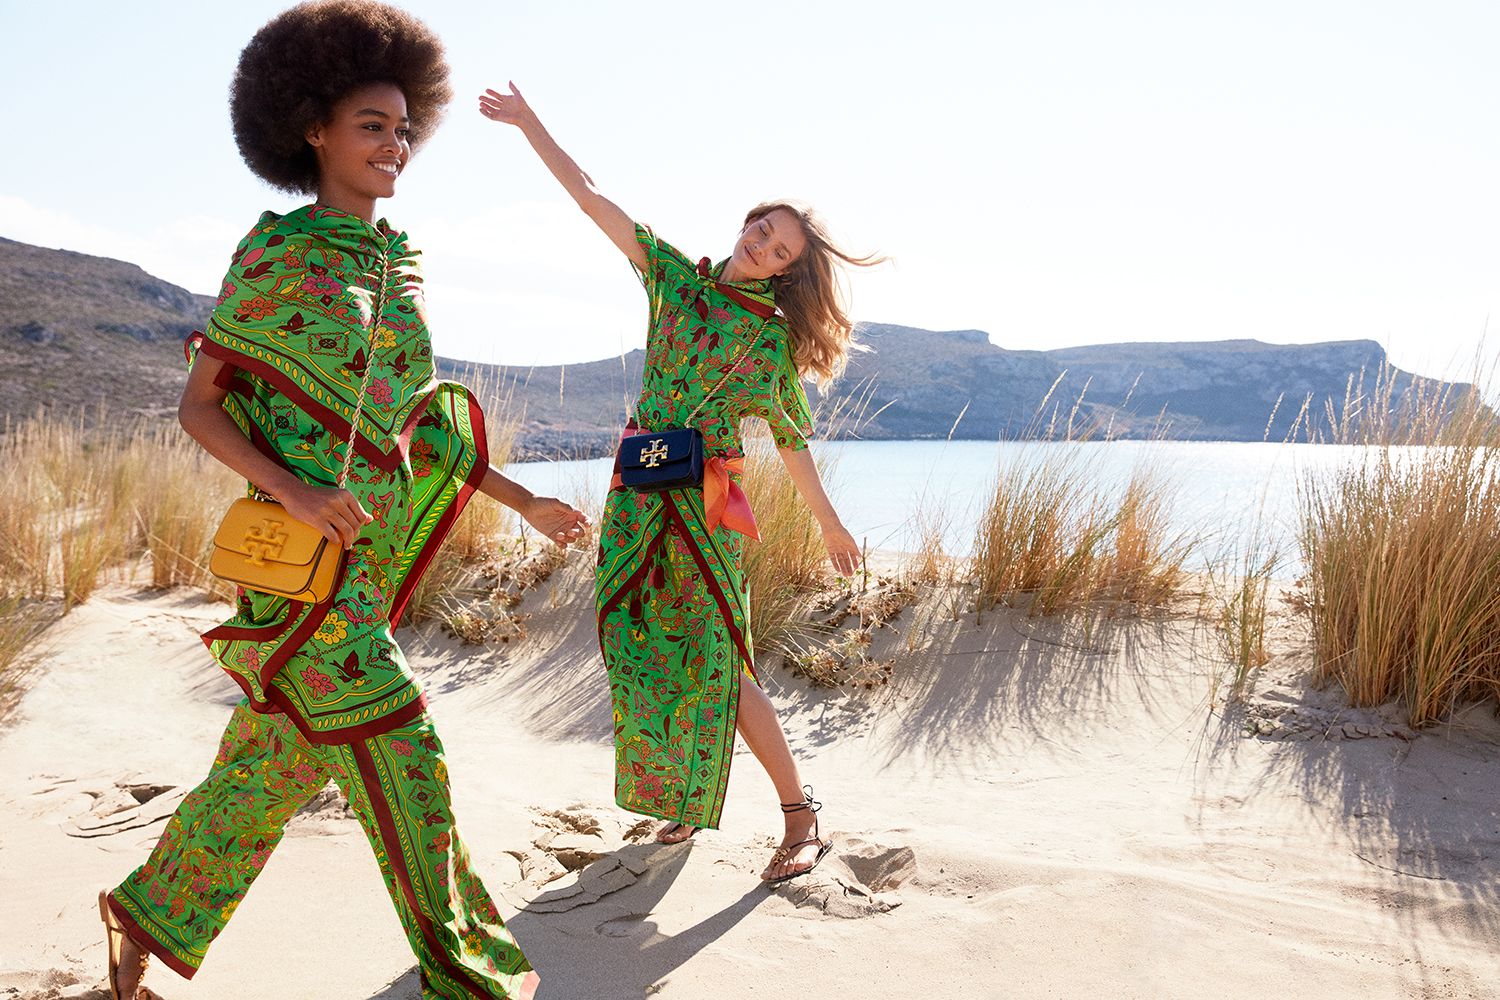 Tory Burch's Dreamy New Spring Collection Has Landed